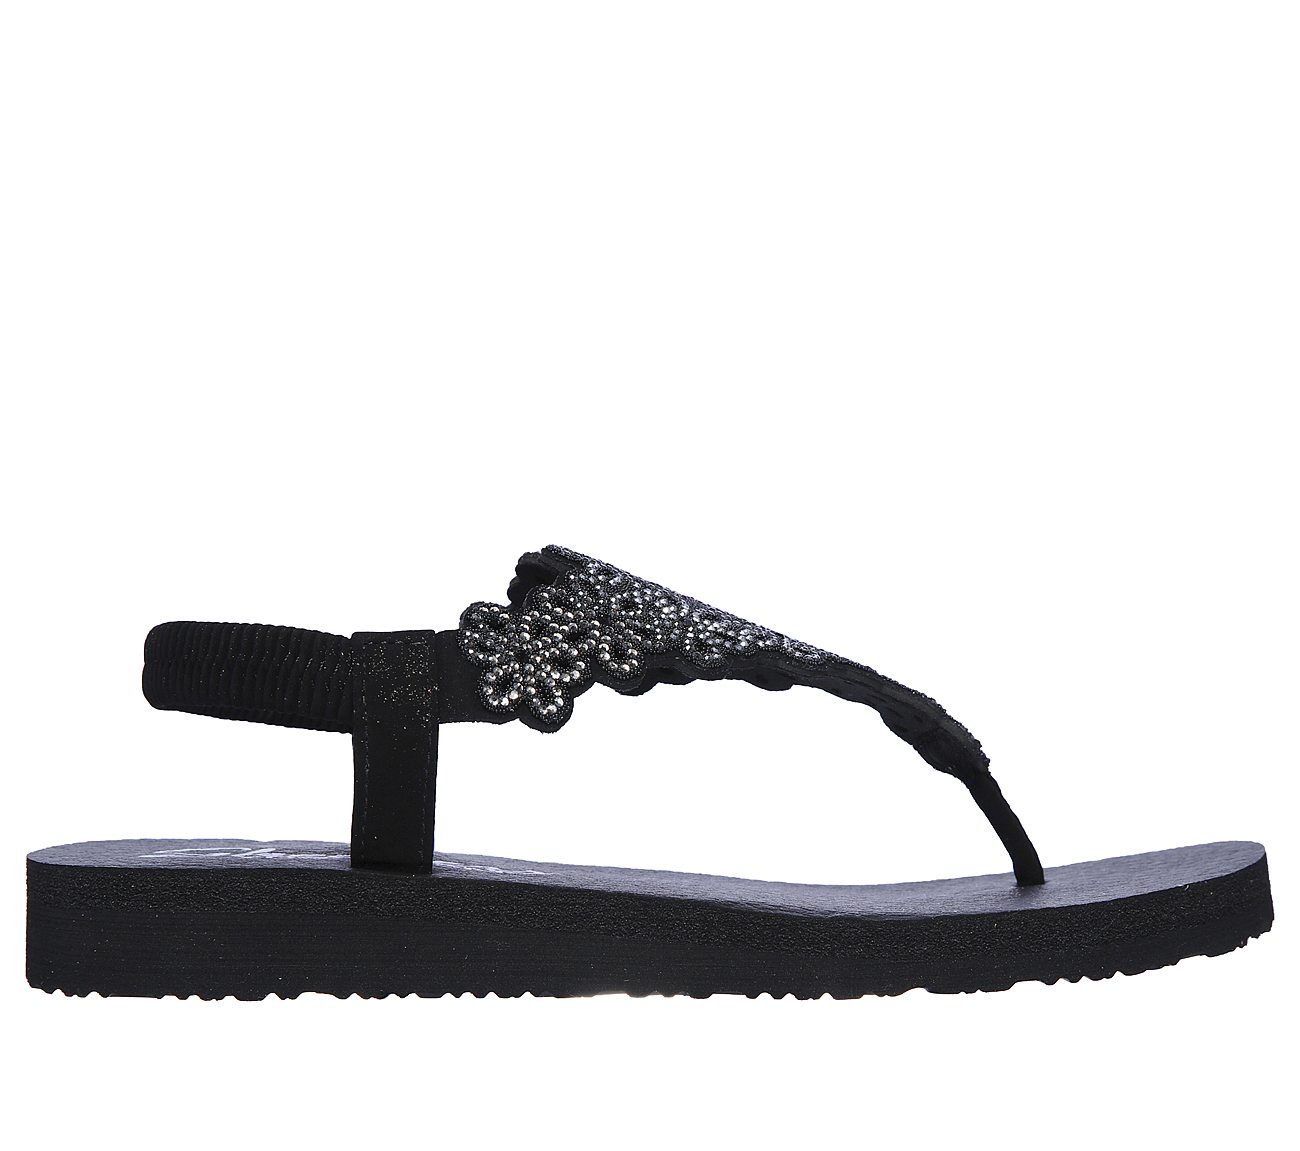 MEDITATION - FLORAL LOVER, BLACK/SILVER Footwear Lateral View